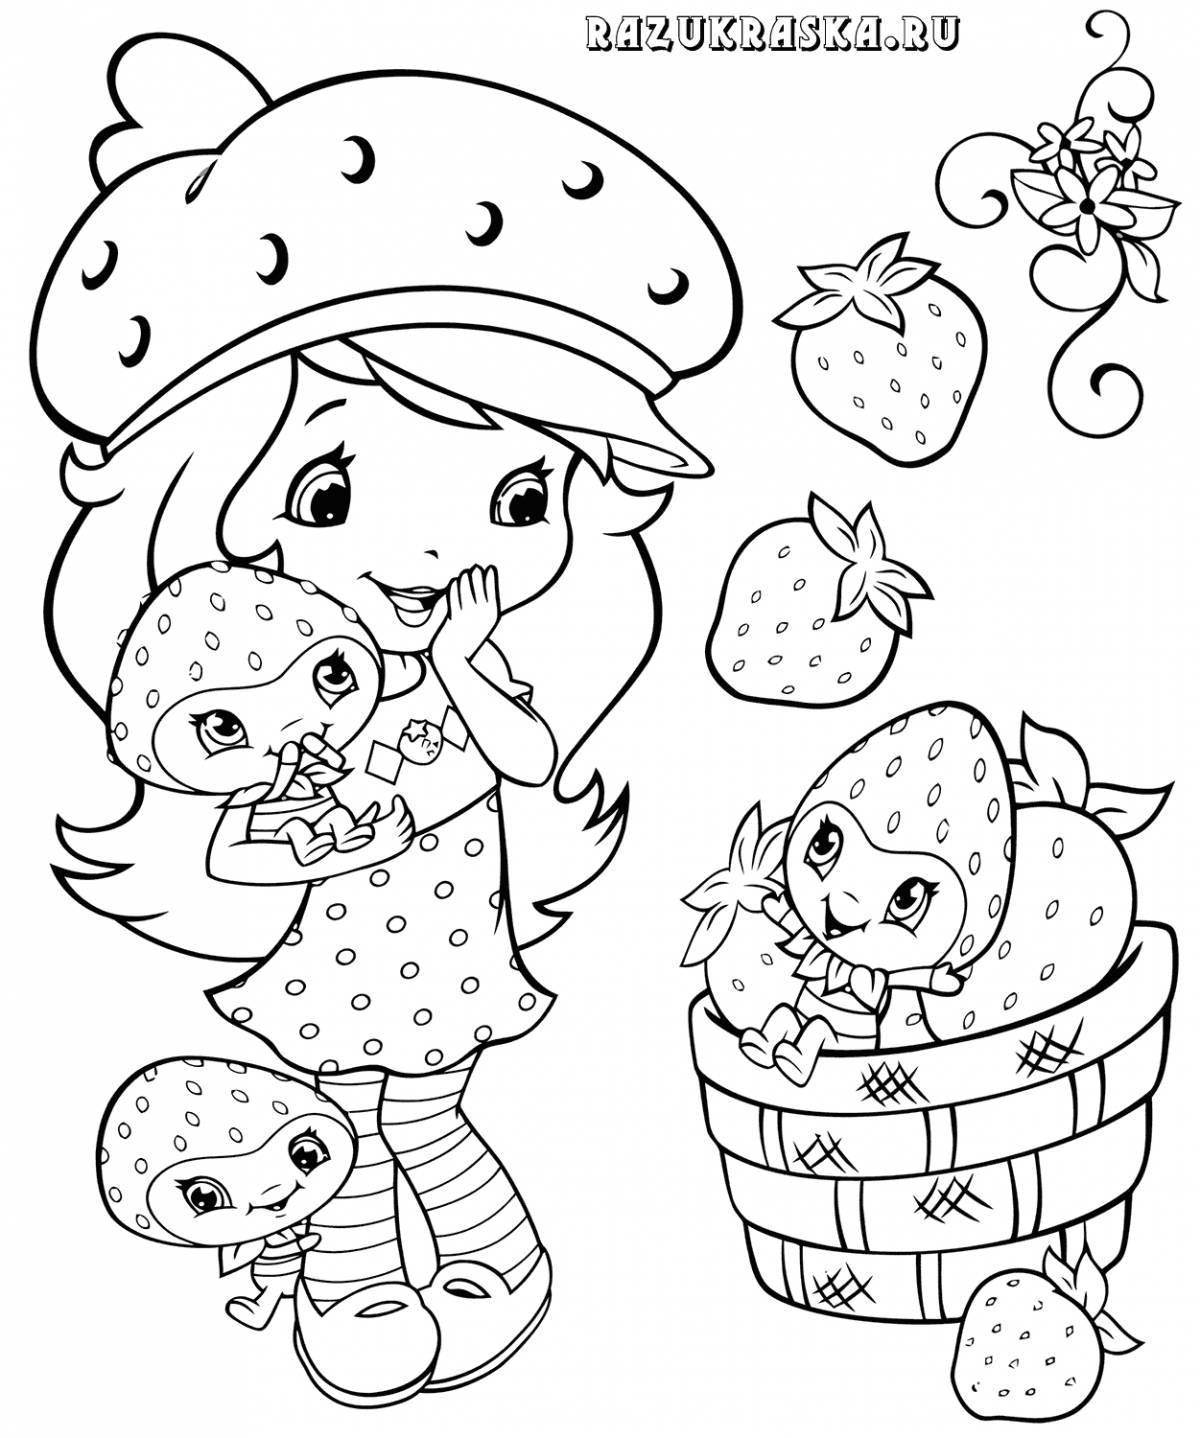 Fancy strawberry coloring book for girls